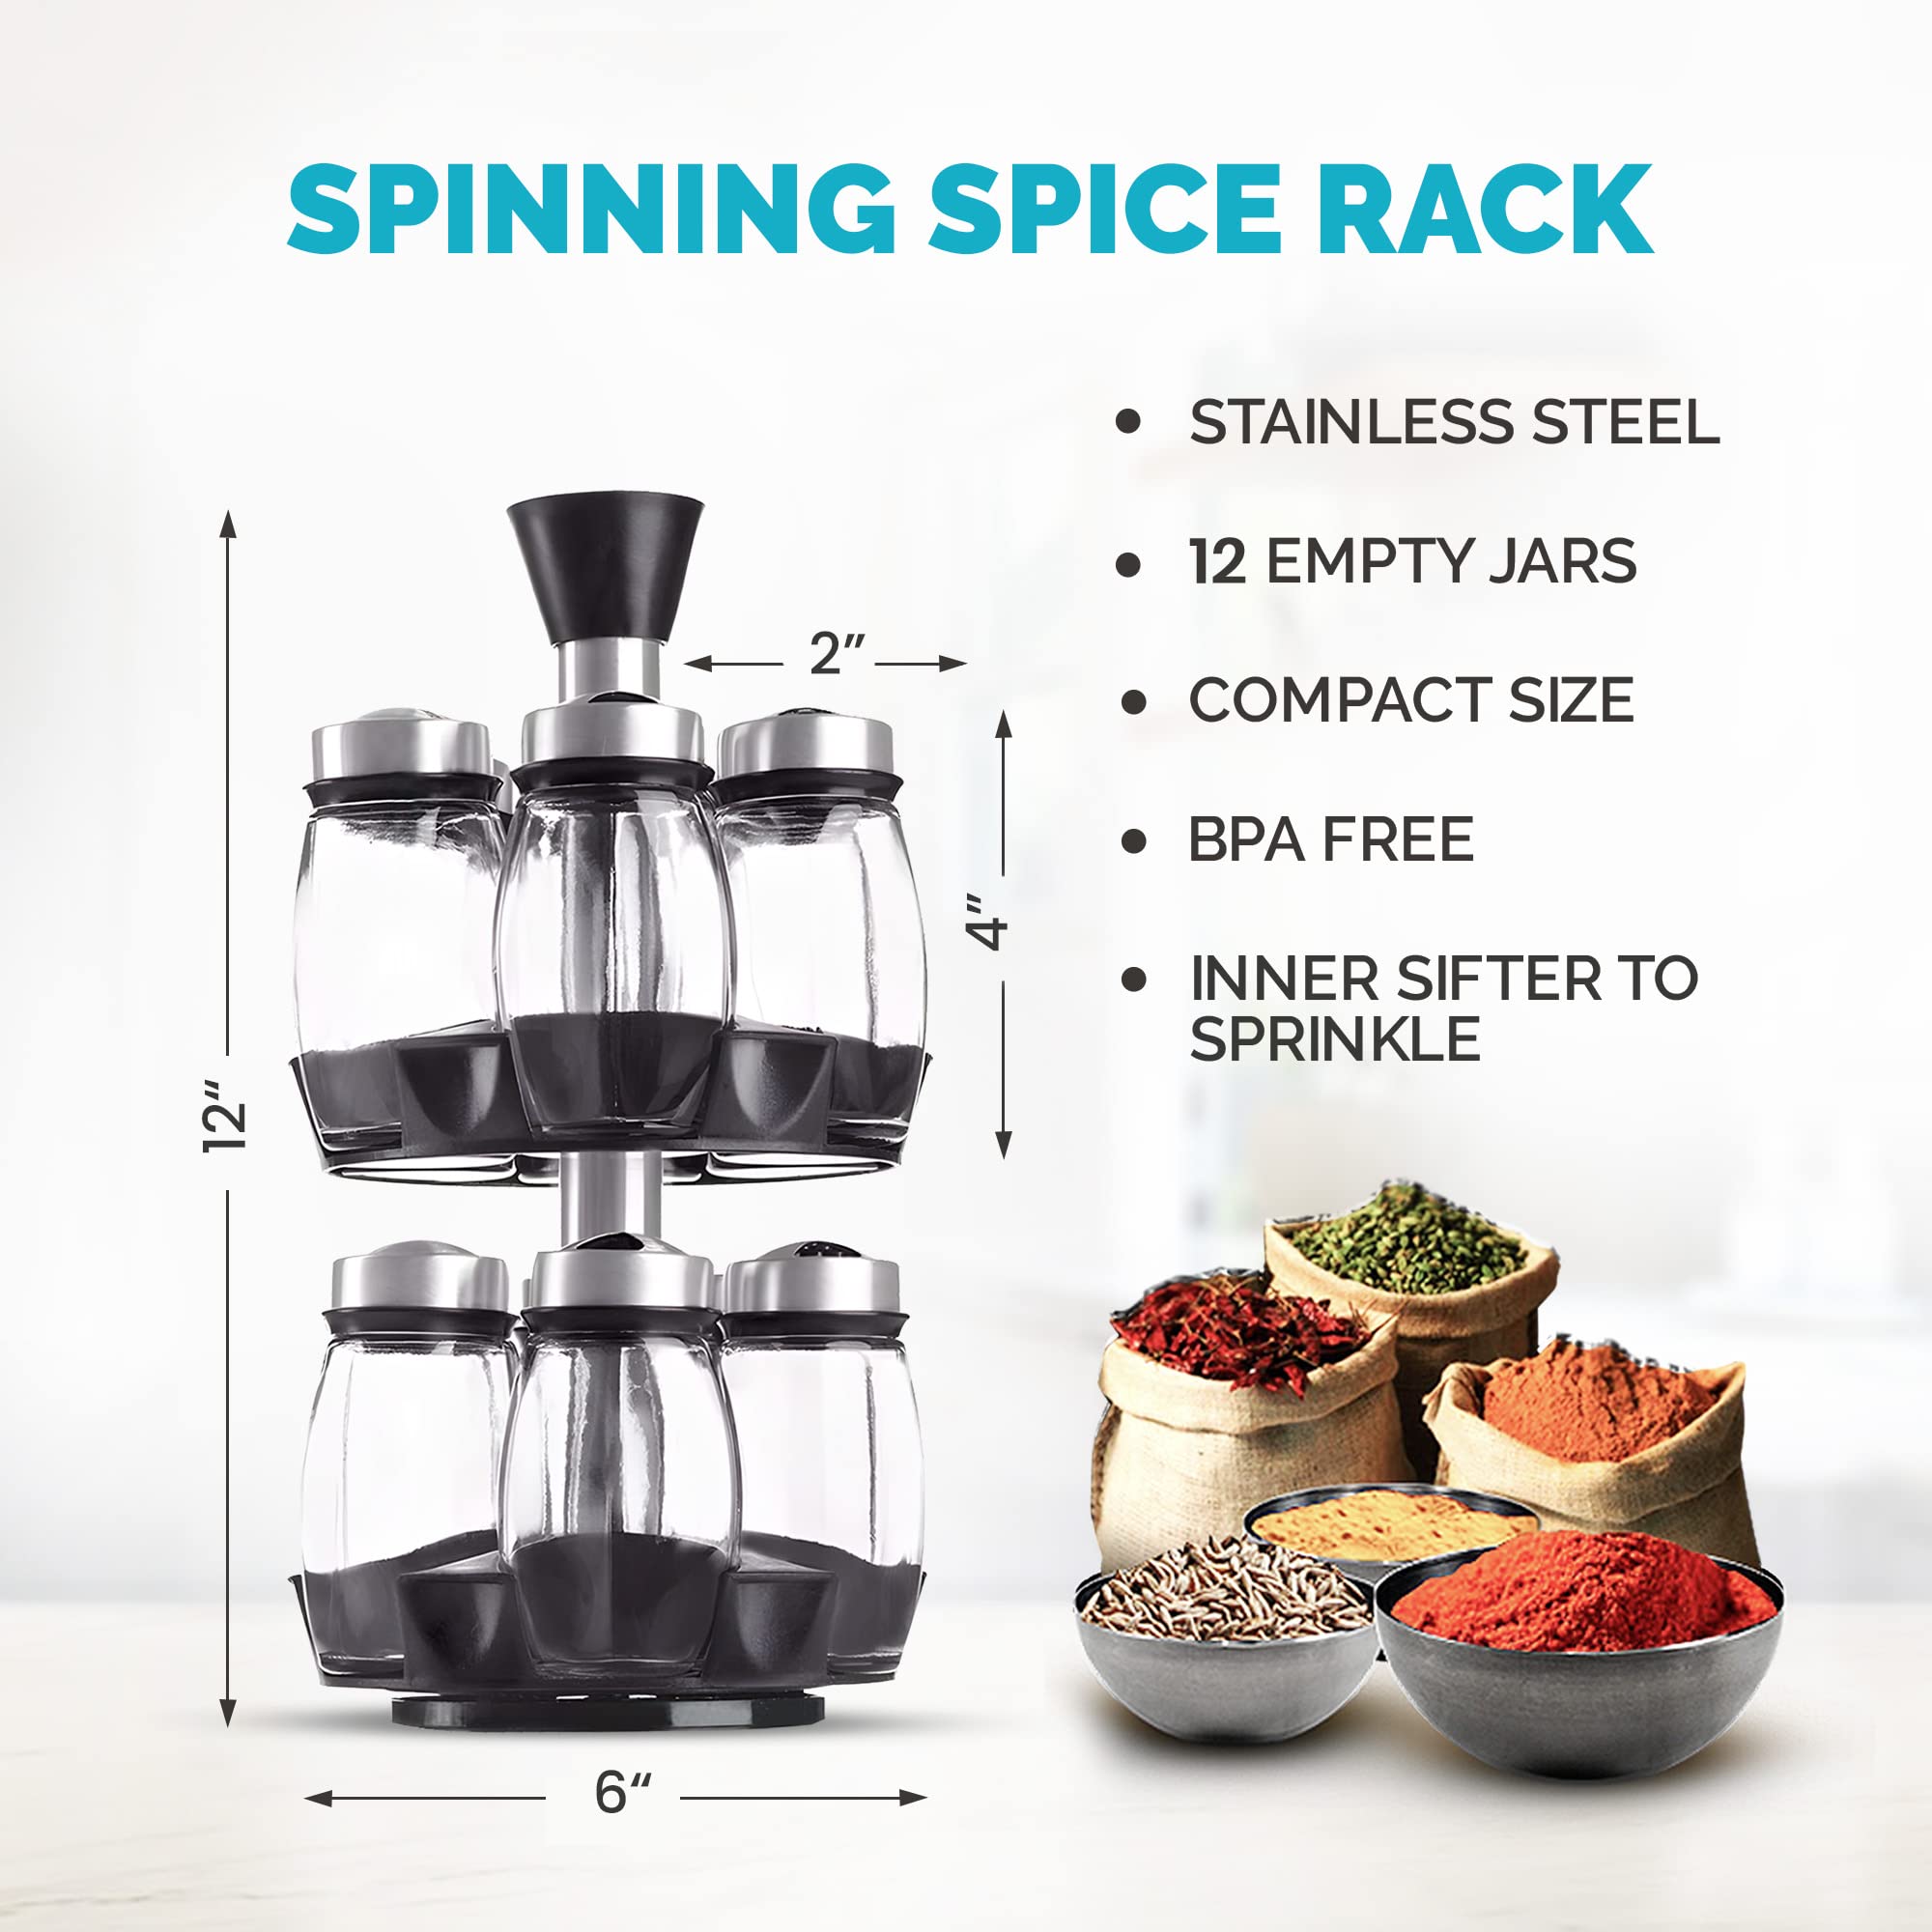 Spice Rack Organizer - Elegant Spice Organizer, Spice Rack with 12 Jars, Seasoning Rack, Compact Spice Rack Organizer for Cabinet or Countertop - Good for Medicine, Craft, Herb or Spice Organization  - Like New